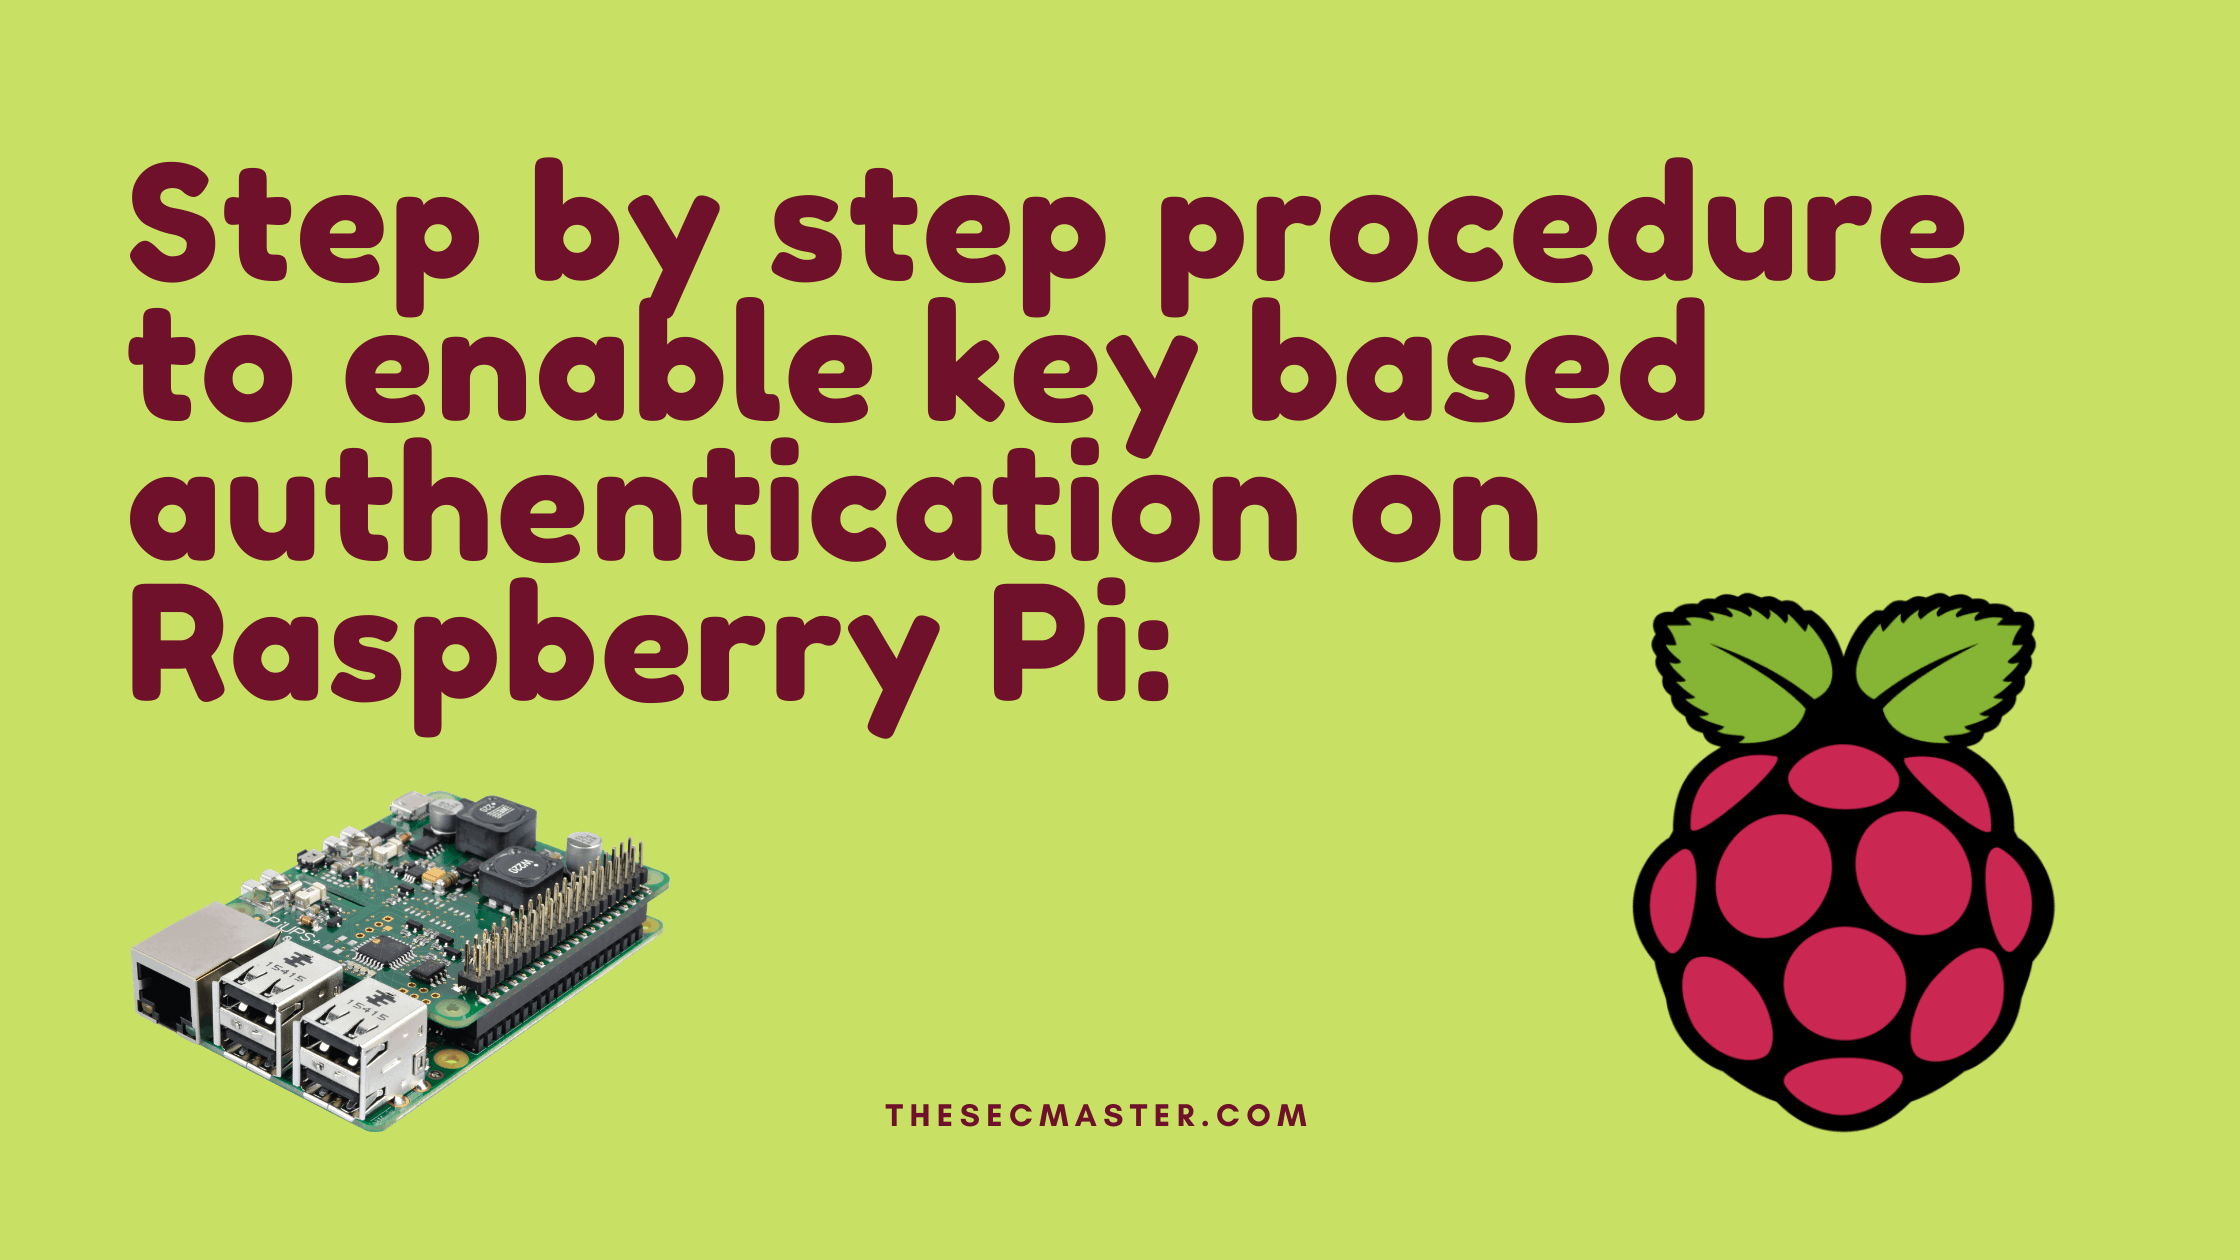 Step By Step Procedure To Enable Key Based Authentication On Raspberry Pi